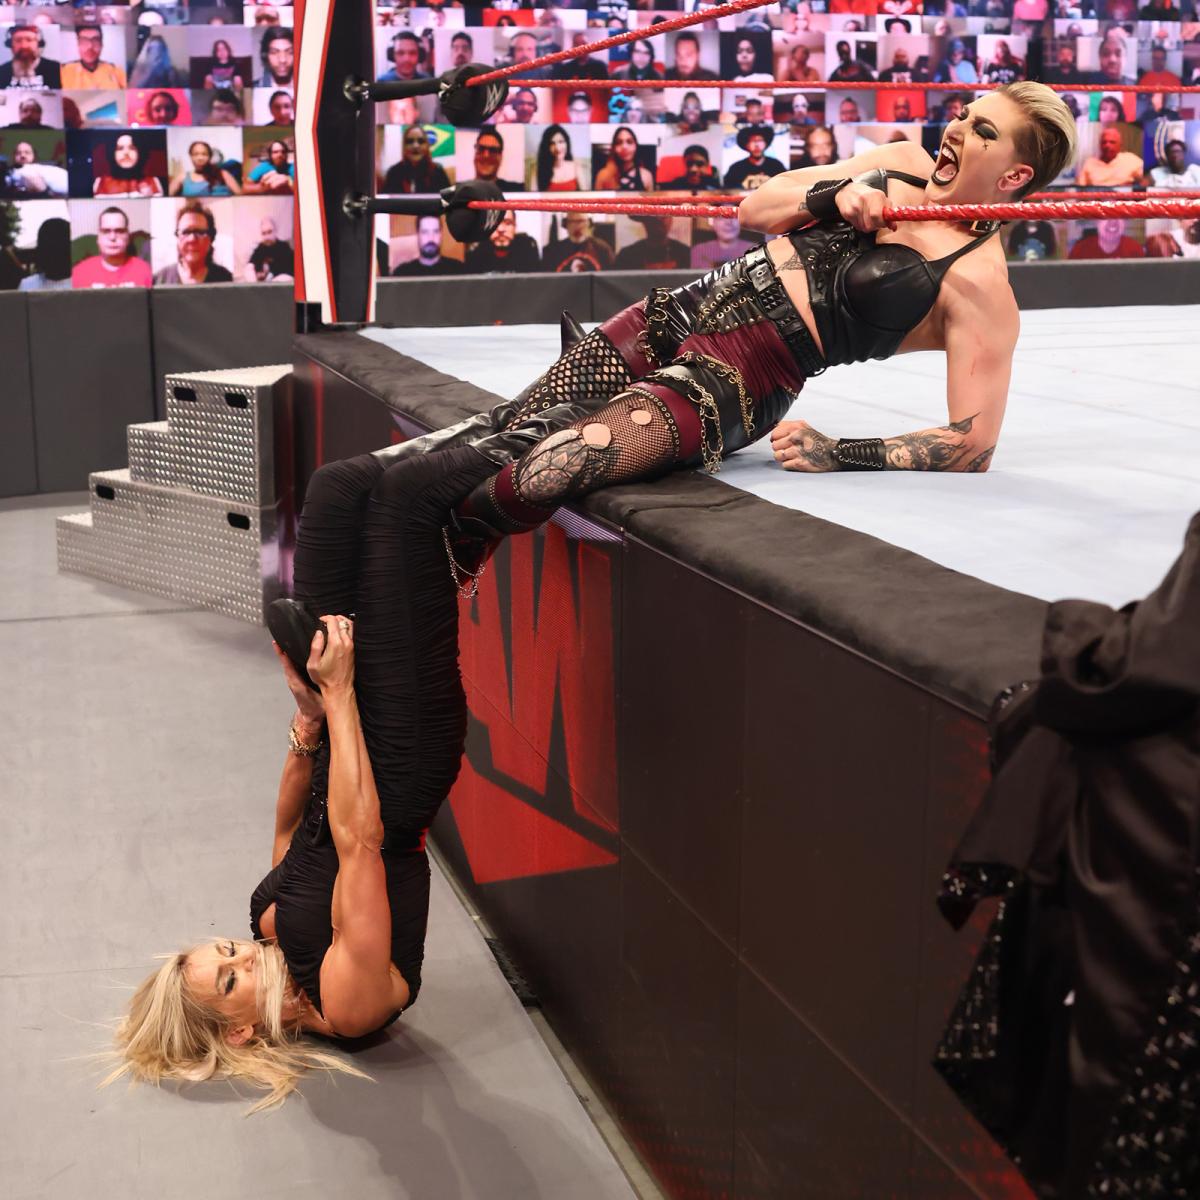 Charlotte attacked Rhea Ripley and possibly injured her on Raw